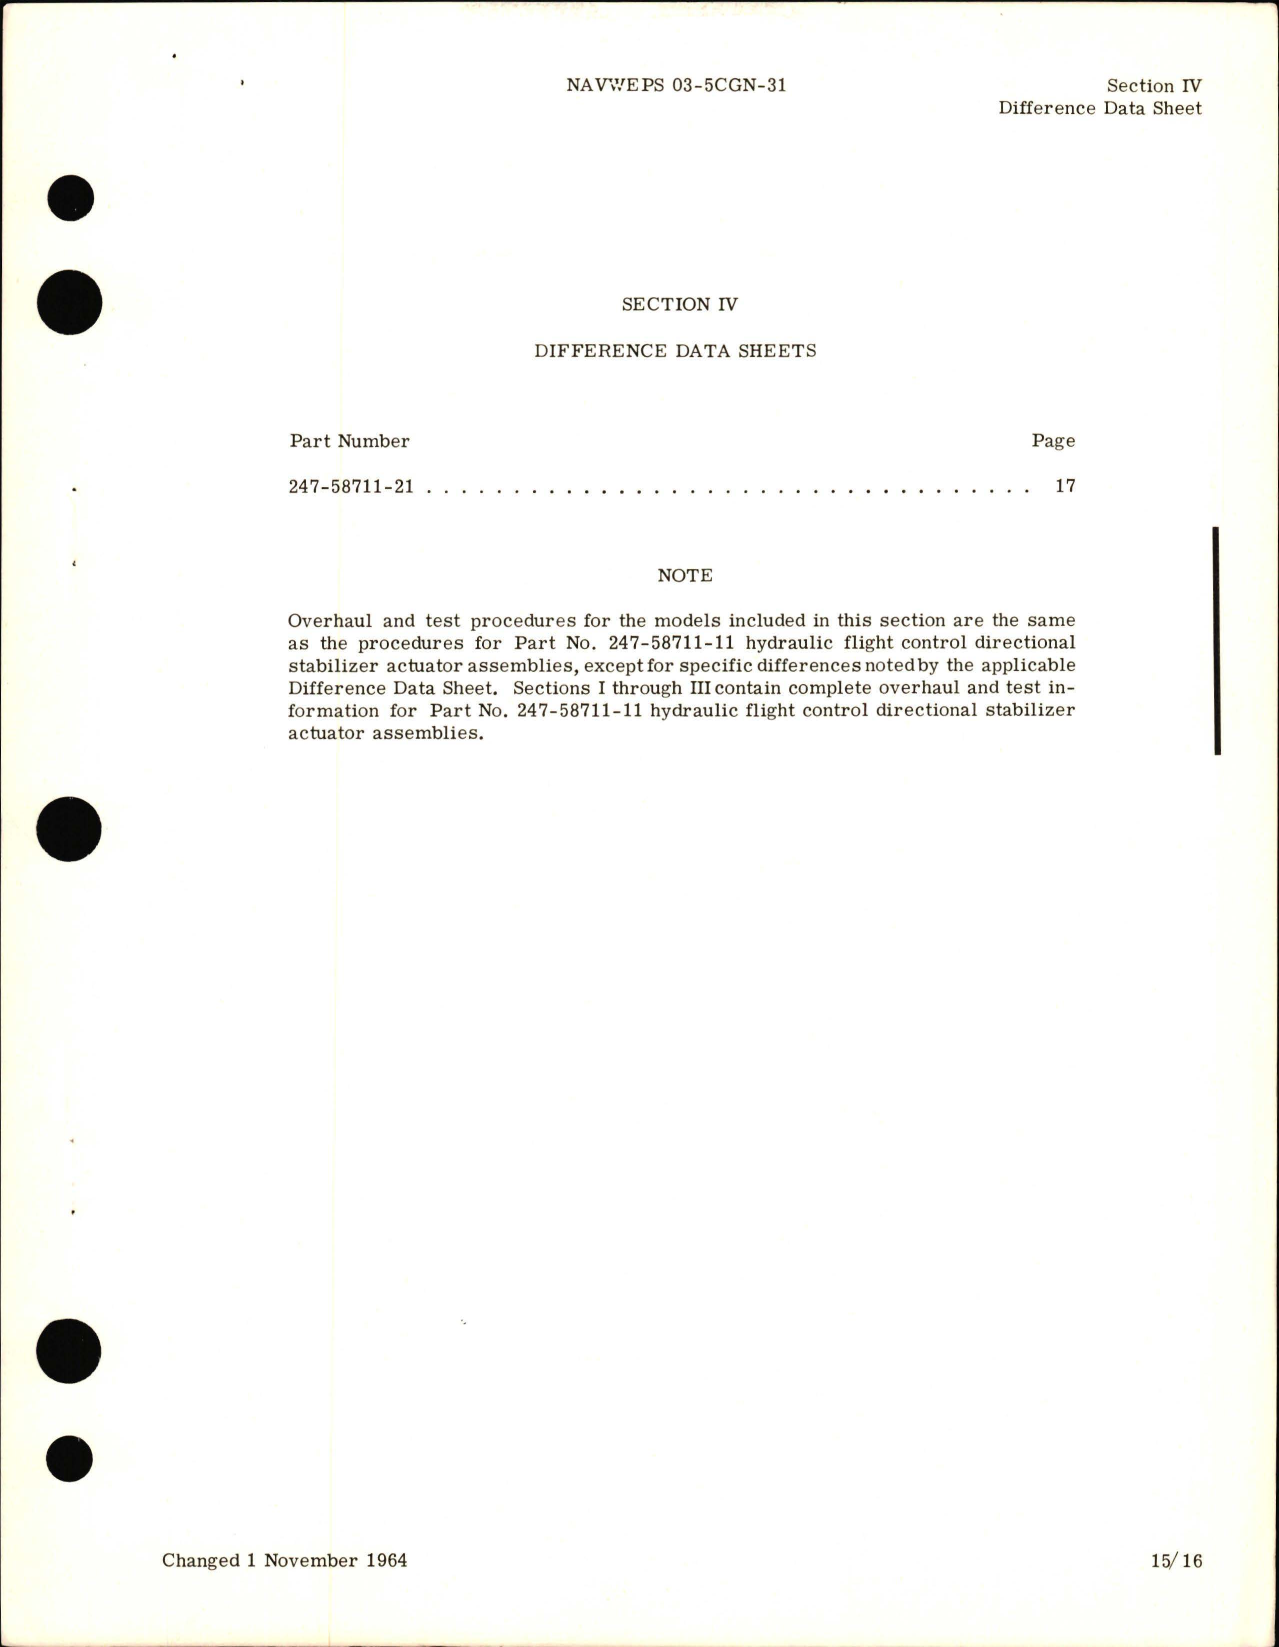 Sample page 9 from AirCorps Library document: Overhaul Instructions for Hydraulic Flight Control, Directional Stabilizer Actuator Assembly - Part 247-58711-11 and 247-58711-21 